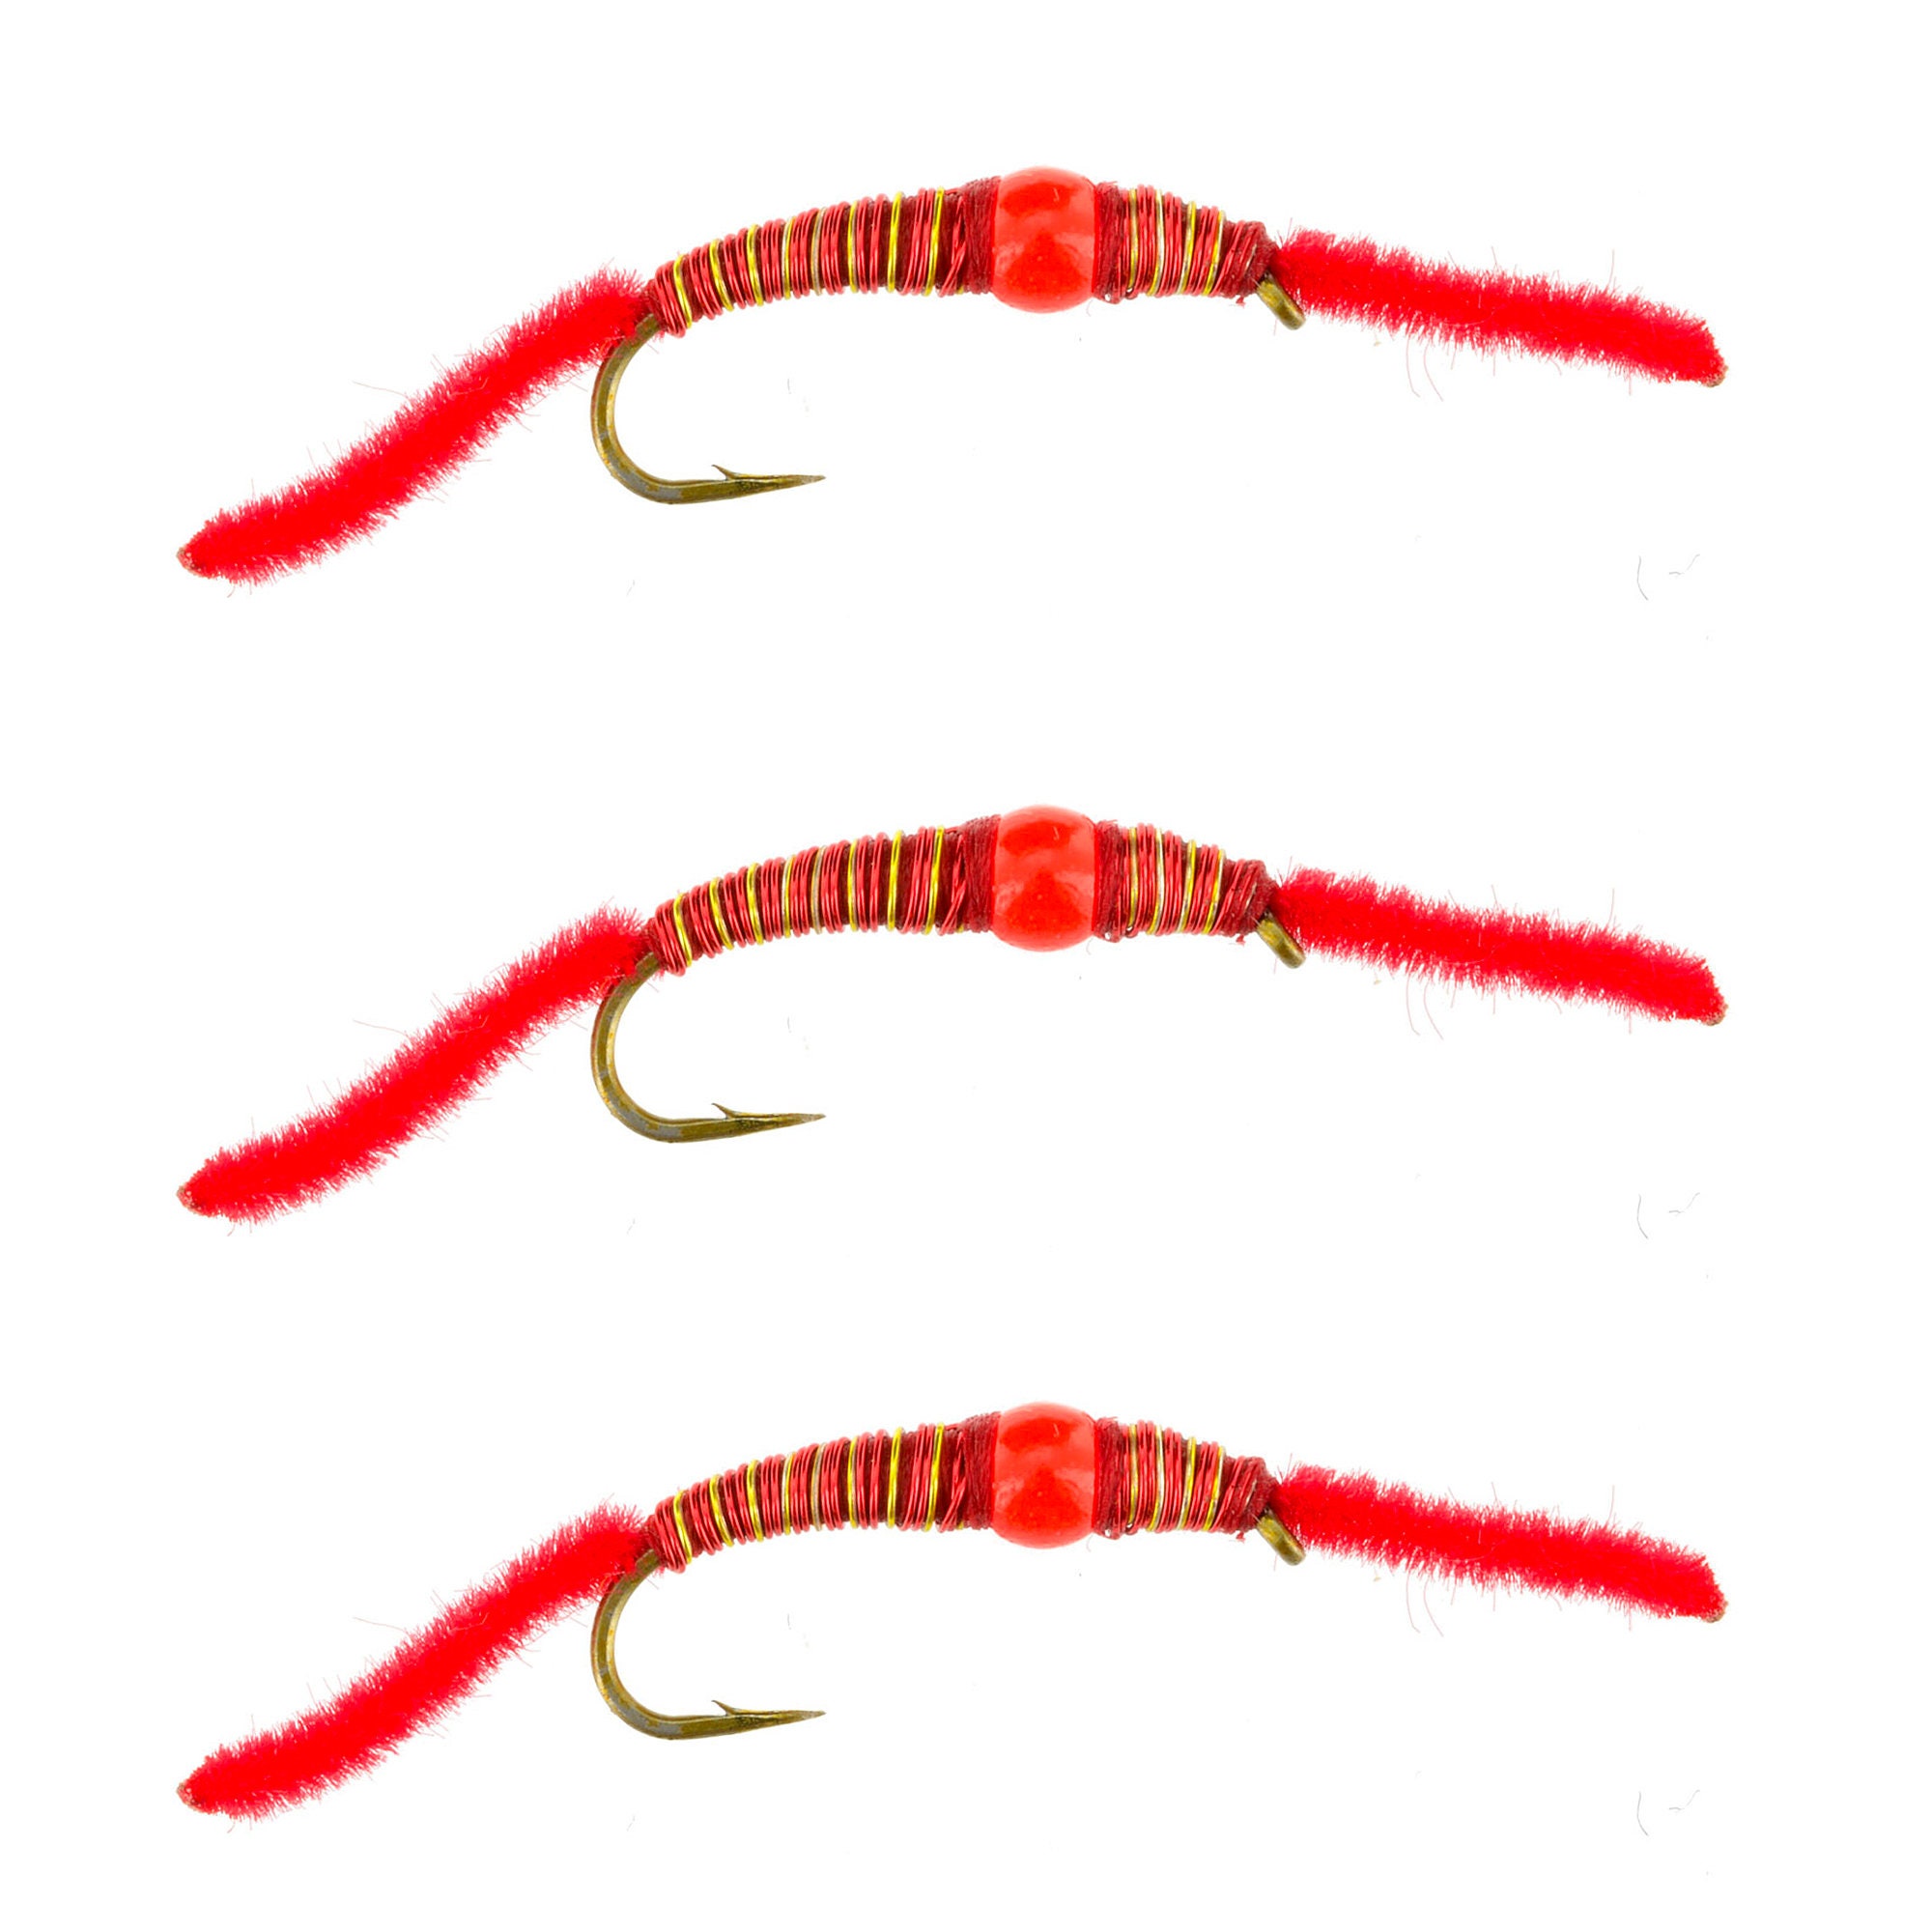 Worm Fly Fish Fly Depth Charge Worm Fly Fishing Flies Fly Box Fishing  Tackle Fishing Gift for Men 3 Pack of Flies 